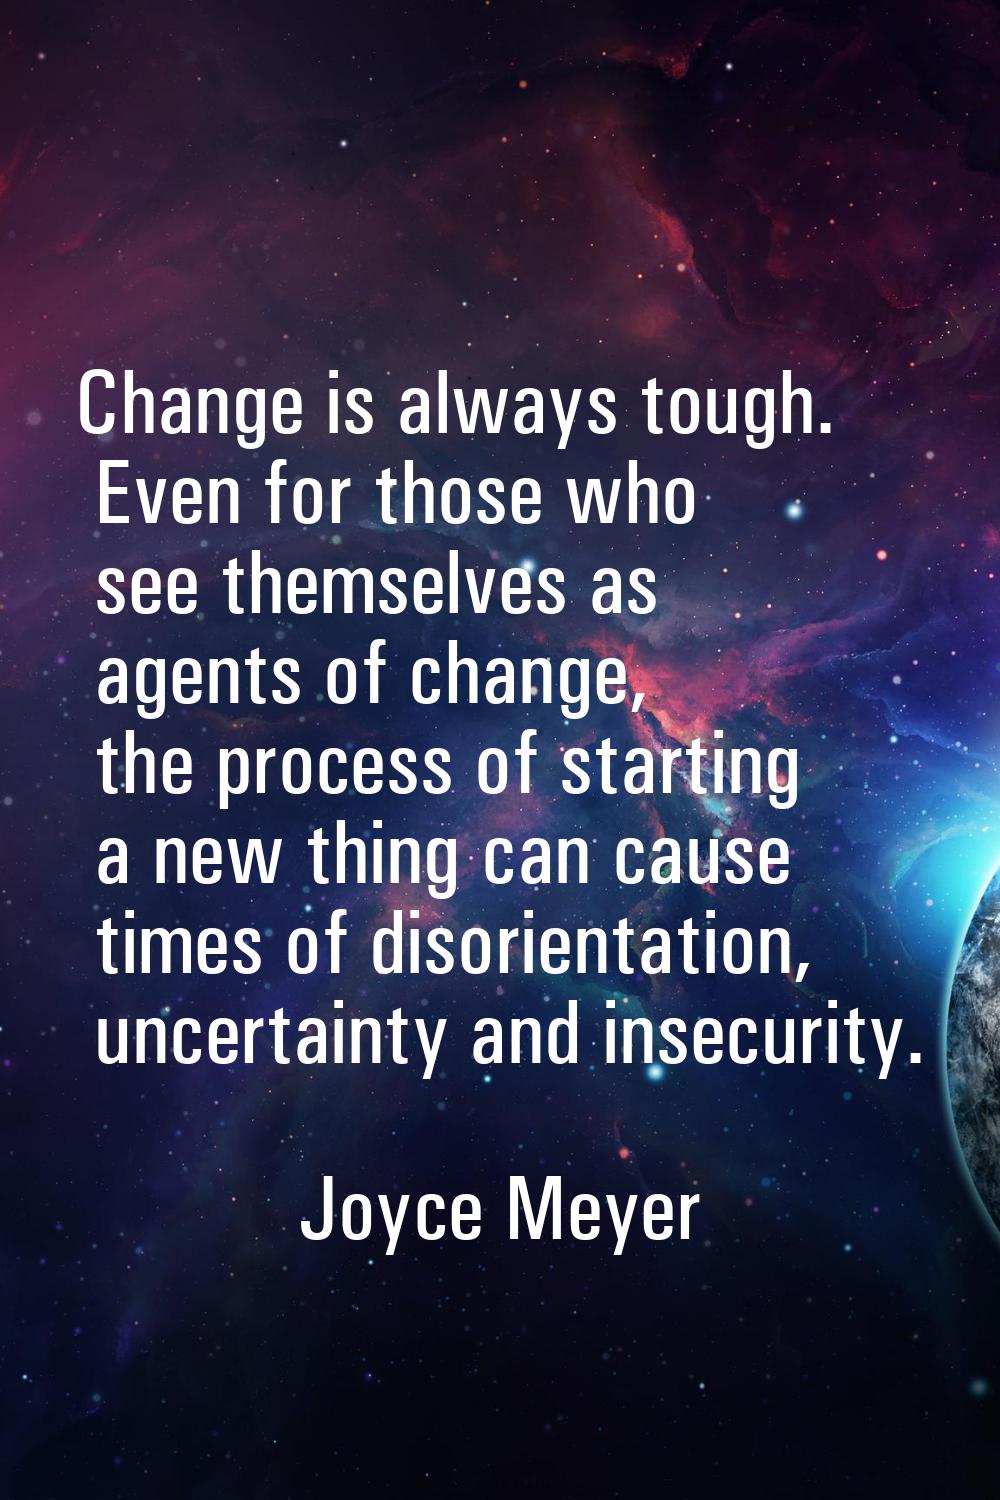 Change is always tough. Even for those who see themselves as agents of change, the process of start